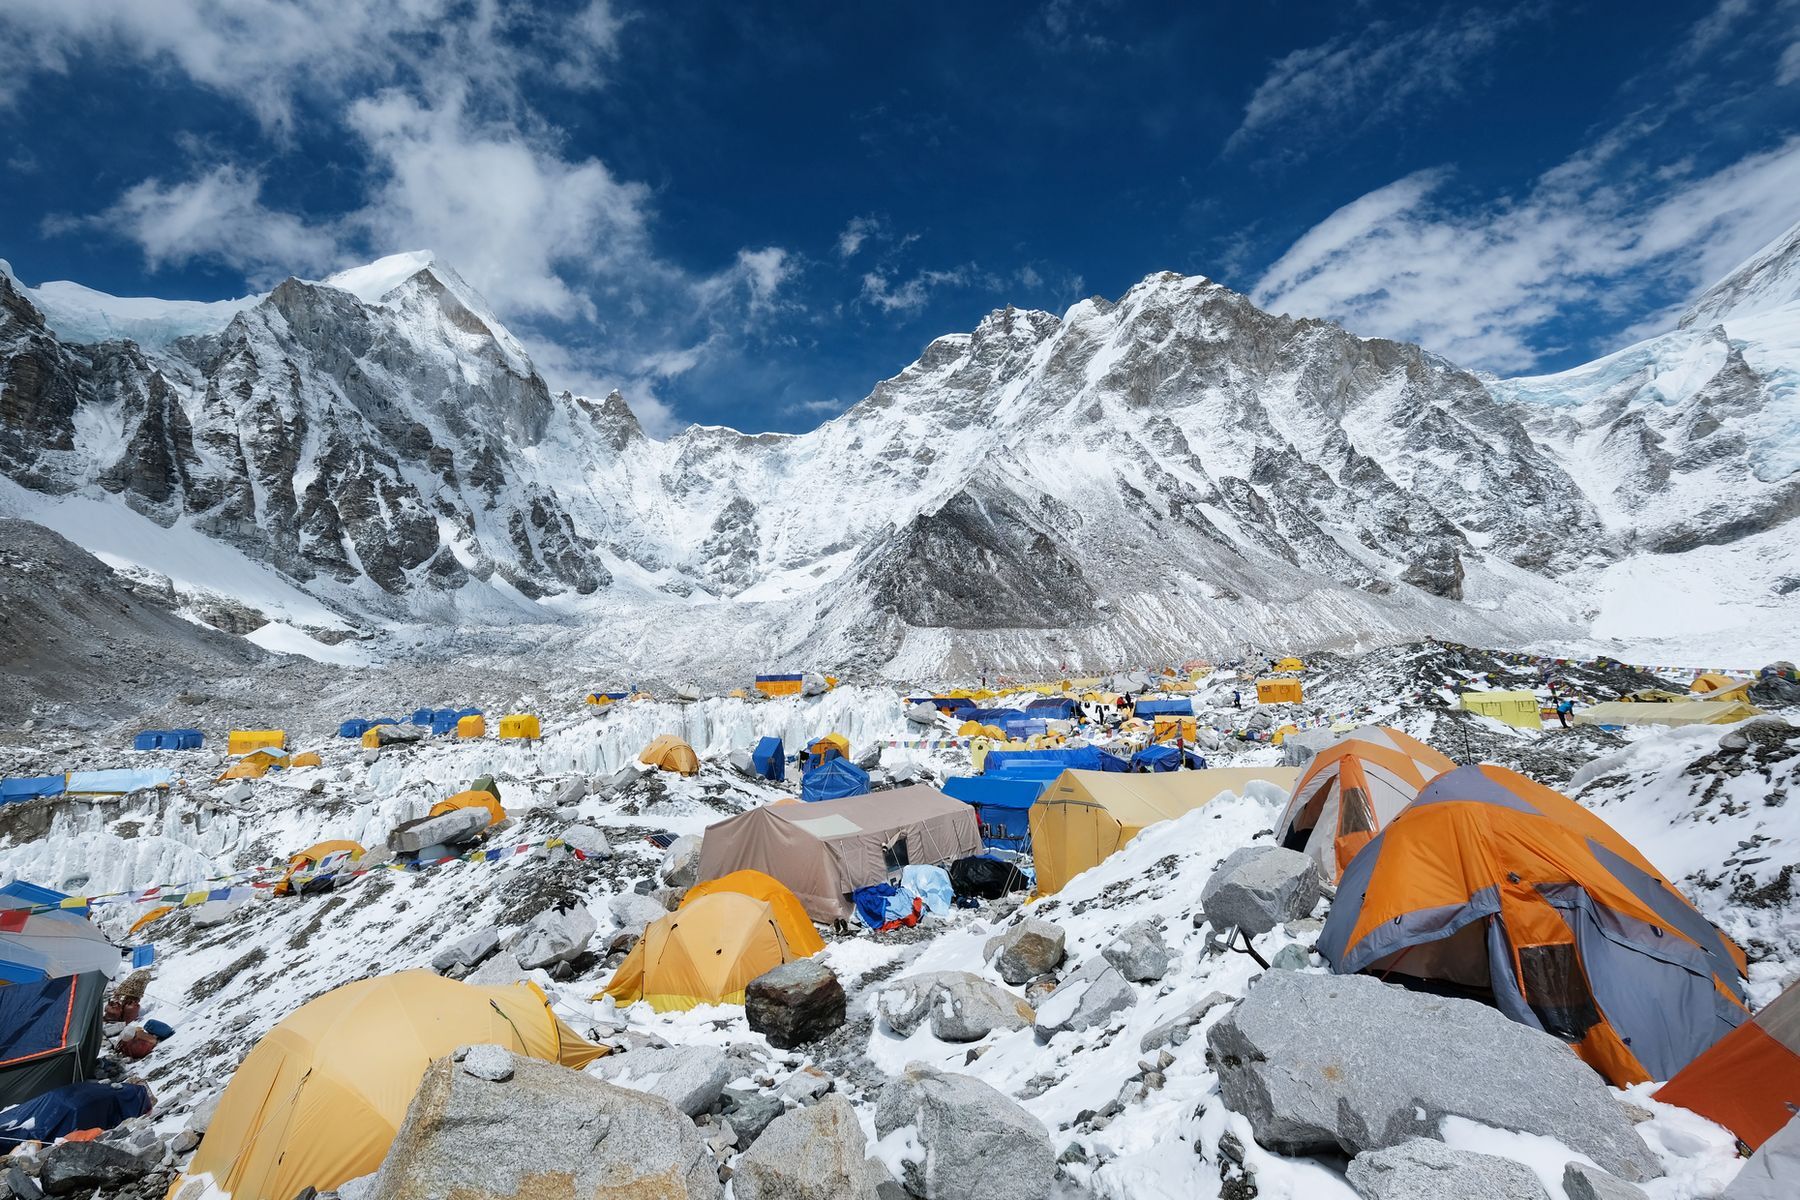 <p>Many climbers train nearly a lifetime to conquer Mount Everest, the highest point on Earth. However, unless you’re an experienced mountaineer, <a href="https://www.nationalreview.com/the-morning-jolt/climbing-mount-everest-is-overrated/">making the trek</a> up this Himalayan Mountain is best to be avoided. With more and more people visiting the area, it has become largely overcrowded and <a href="https://education.nationalgeographic.org/resource/trash-and-overcrowding-top-world/">polluted</a>. Skip the long lines and “highest garbage dump” in the world and try scaling the height of <a href="https://www.adventurealternative.com/climb-mount-kilimanjaro/">Kilimanjaro</a> instead. </p>